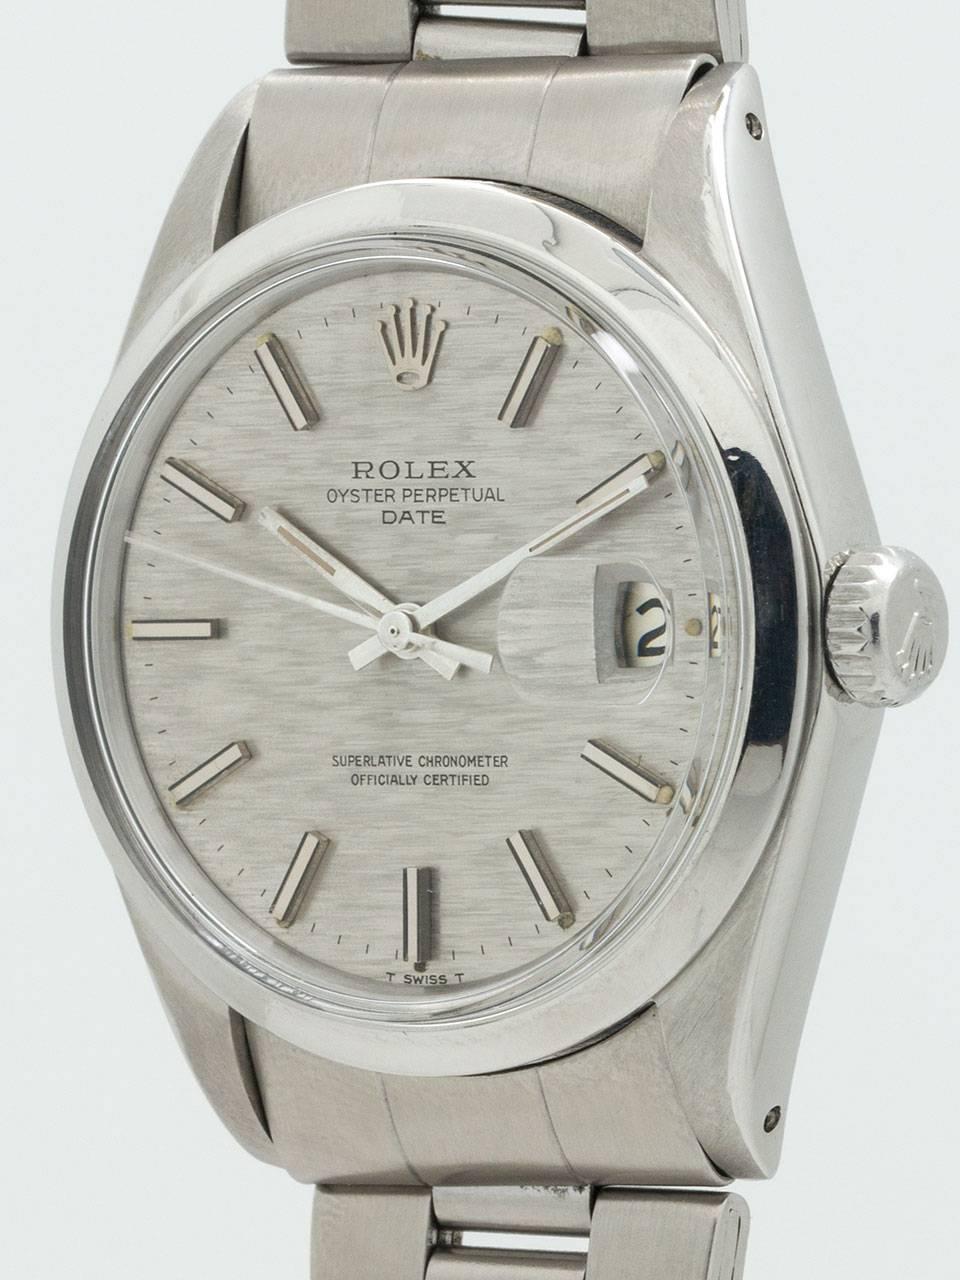 
Rolex Oyster Perpetual Date ref 1500 circa 1970. Featuring 34mm diameter case with smooth bezel, acrylic crystal, and original anthracite gray “linen” texture dial with applied silver indexes and silver baton hands. Powered by caliber 1570 self